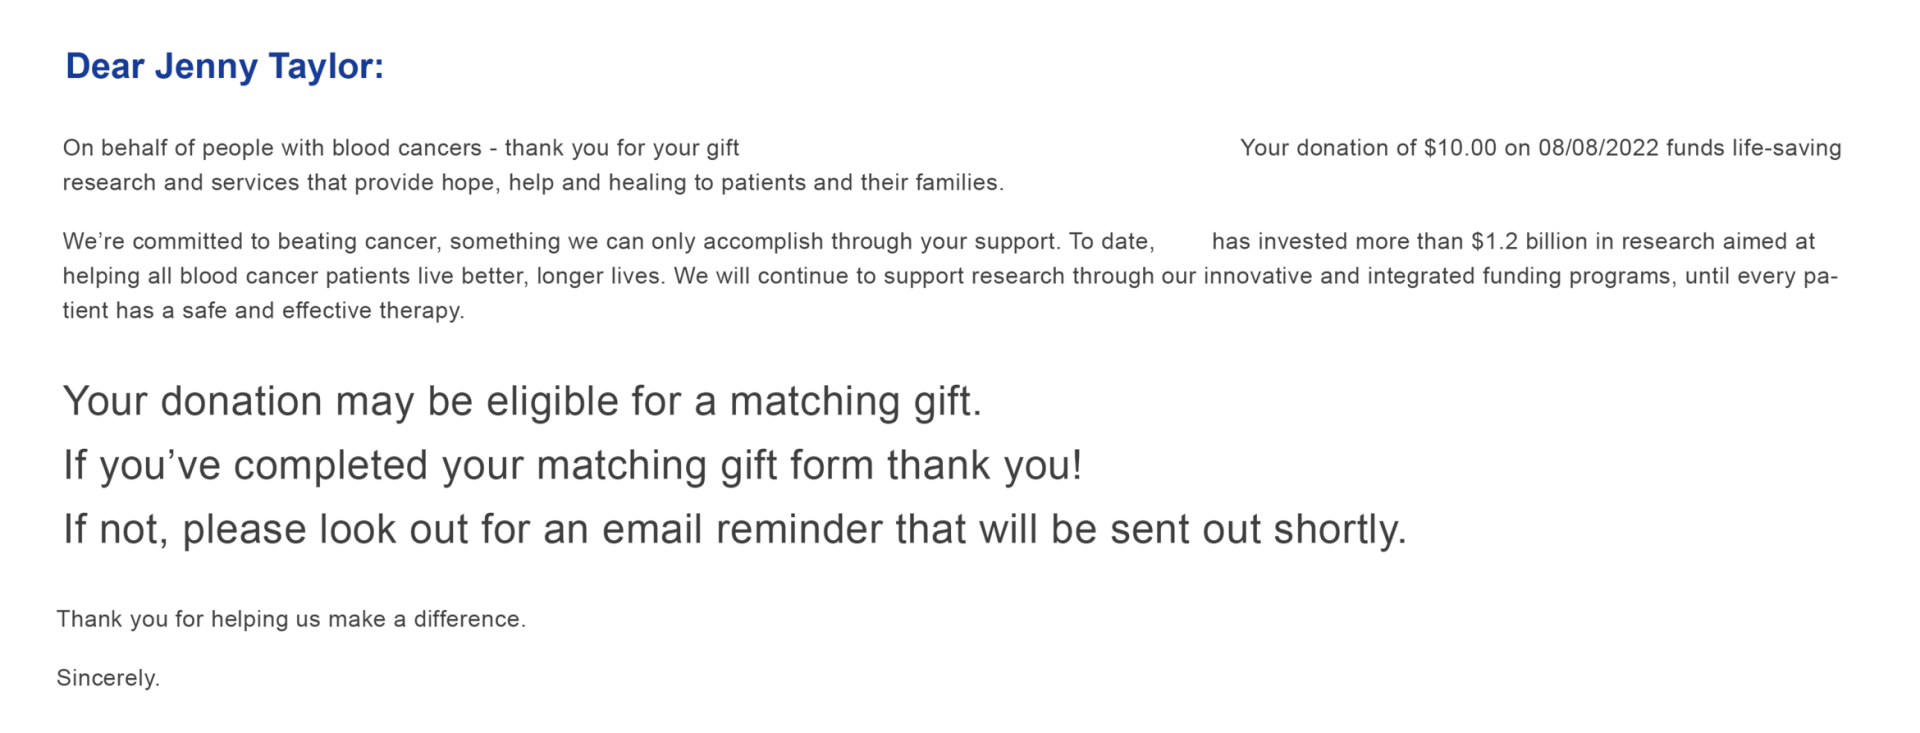 Example matching gift follow-up email from LLS